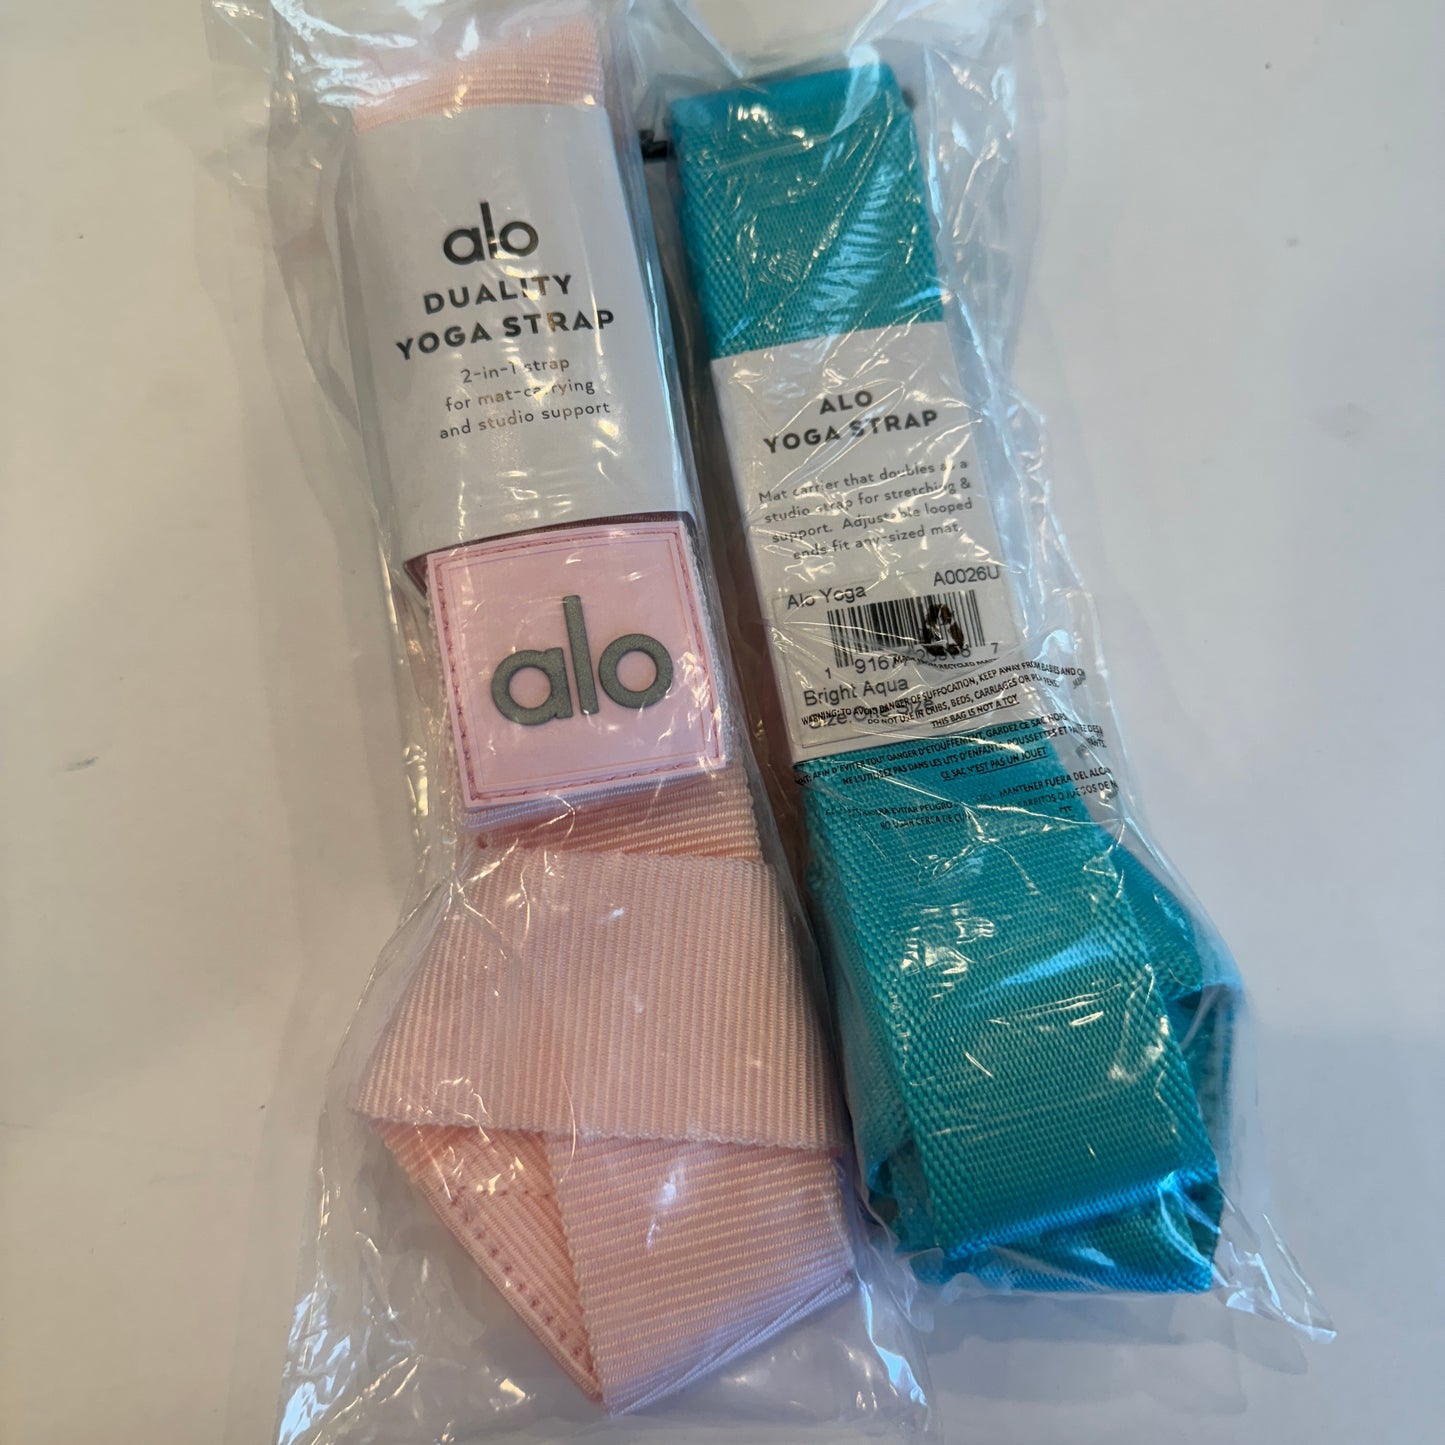 Alo Straps , Pink / Teal Yoga Strap BUNDLE (2) Both are Brand New !